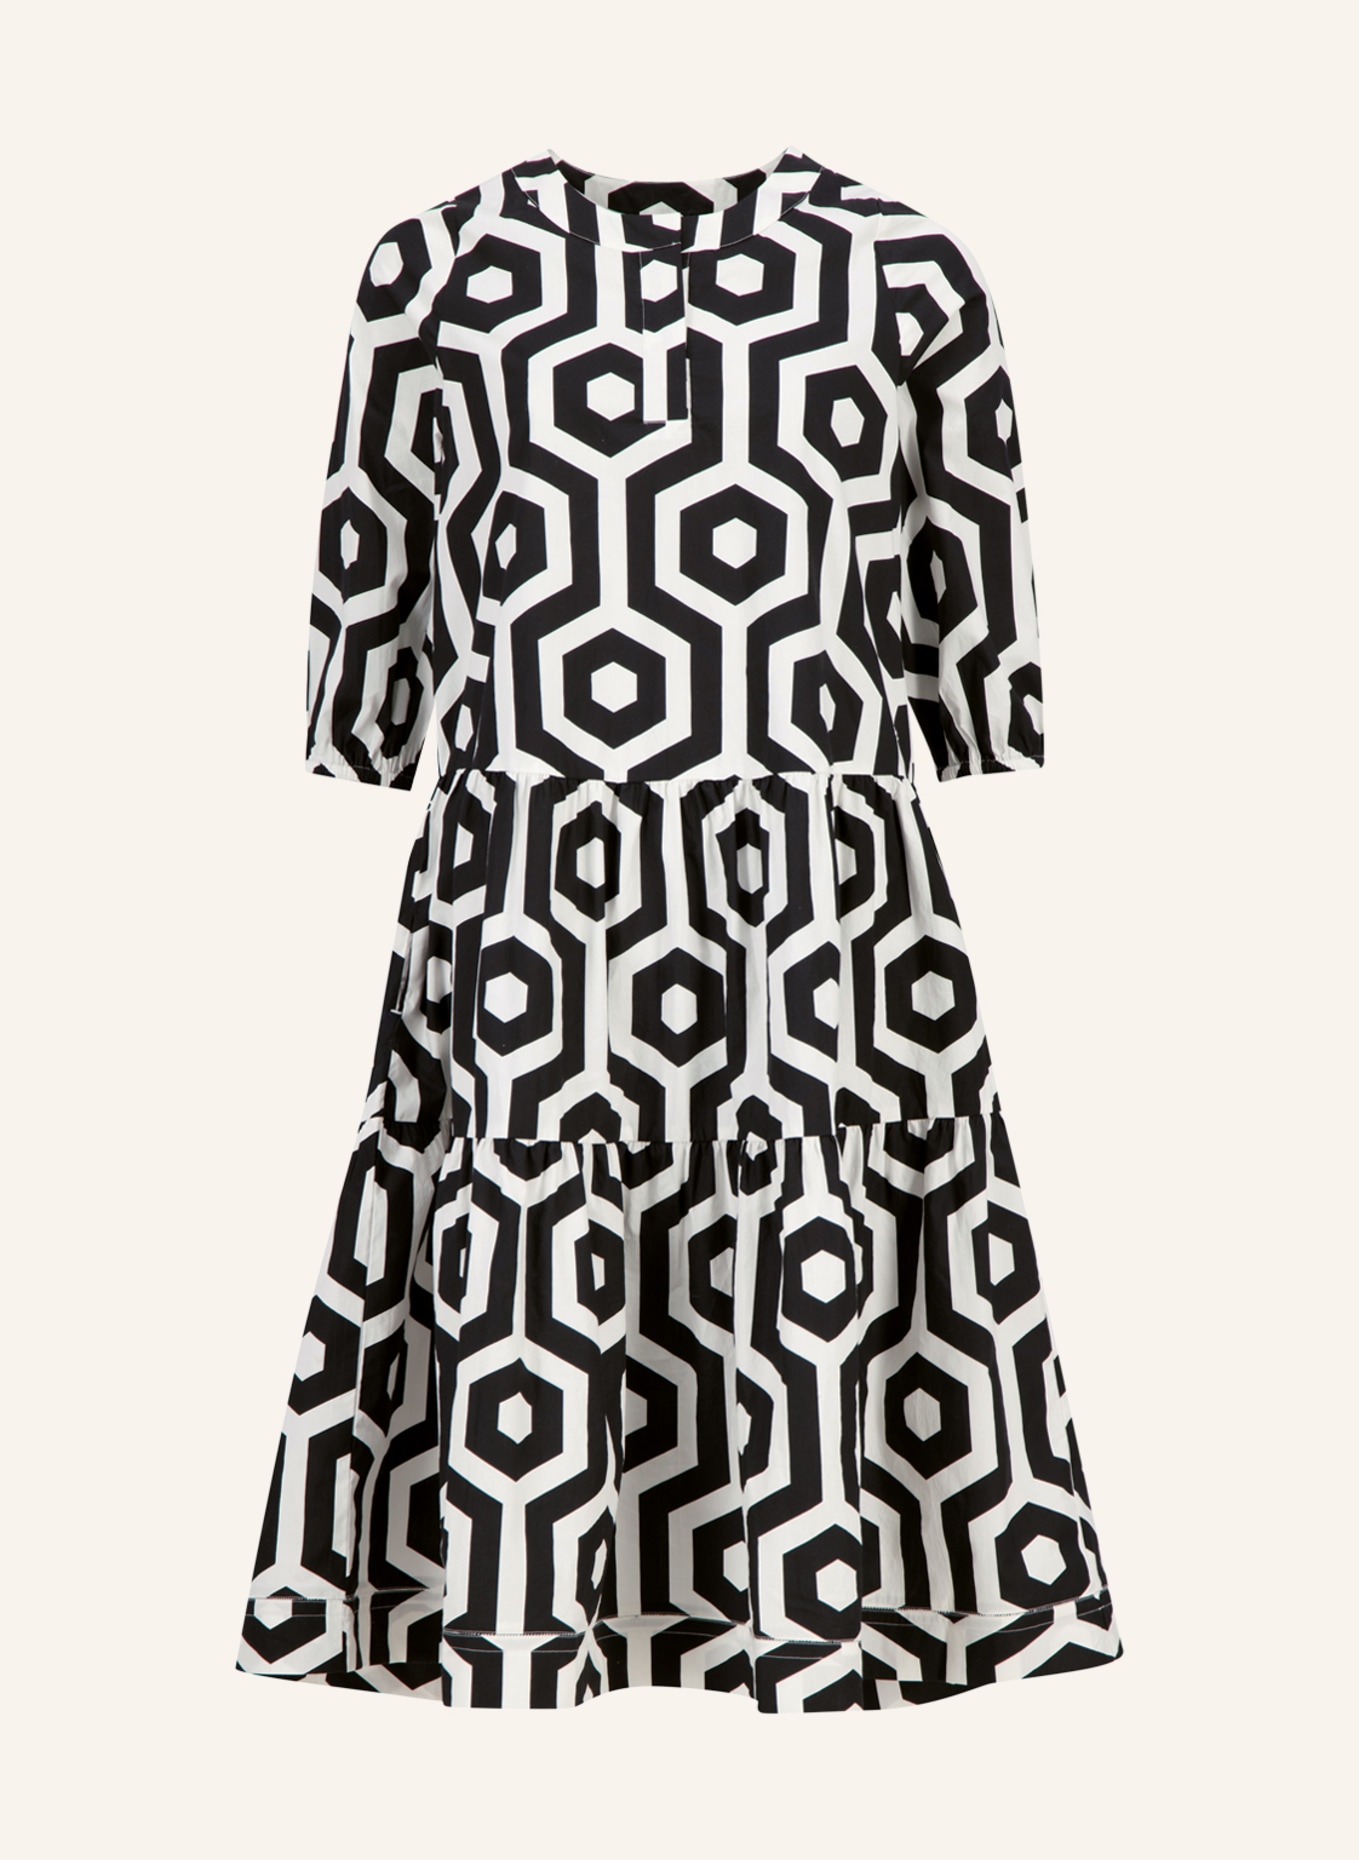 FYNCH-HATTON Dress with 3/4 sleeves in black/ white